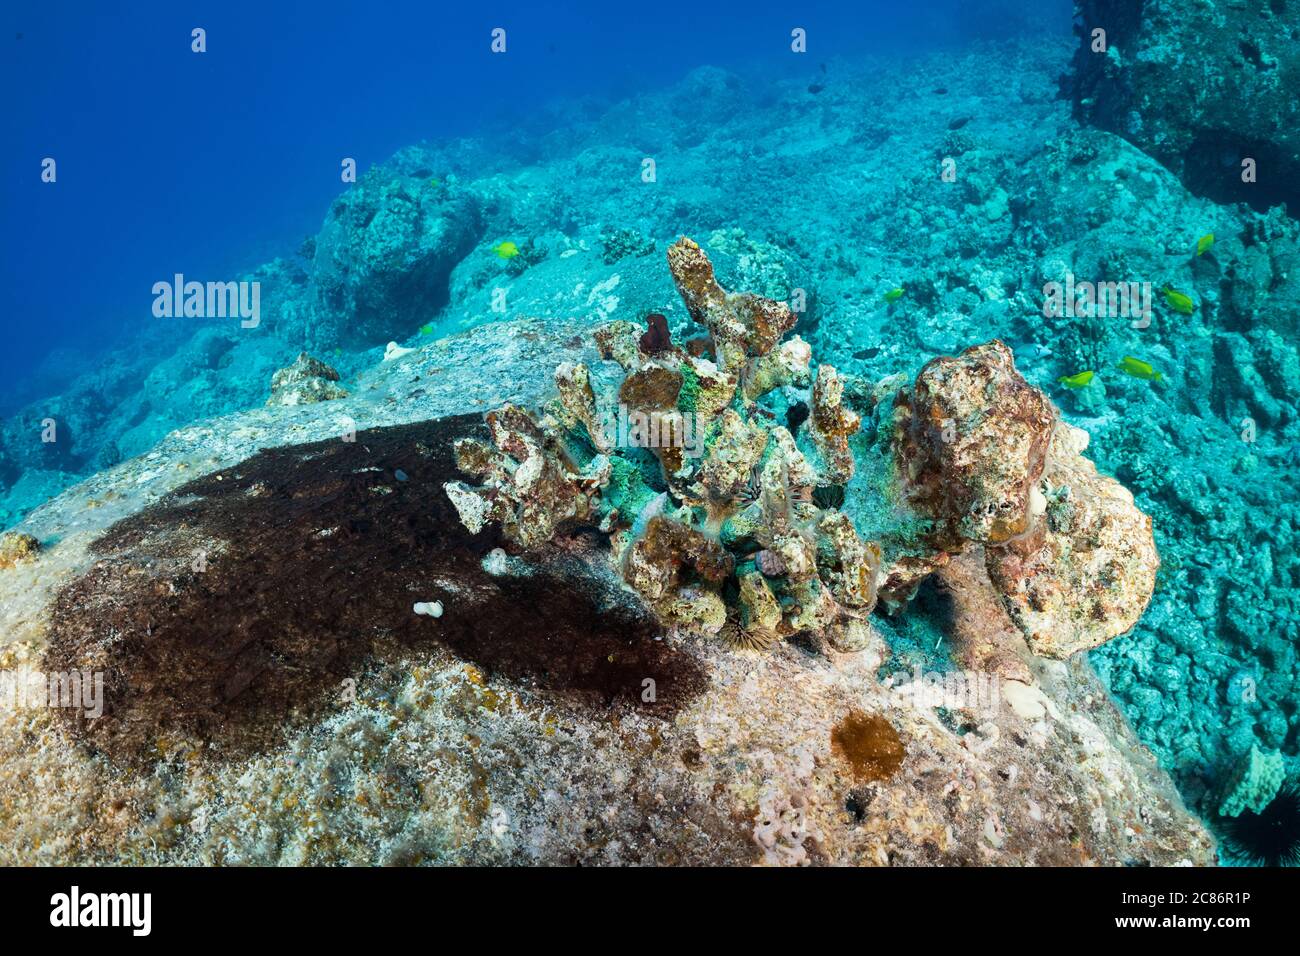 a dark mat of algae spreads across the substrate next to the skeleton of an antler coral colony that bleached and died from too warm seawater, Hawaii Stock Photo